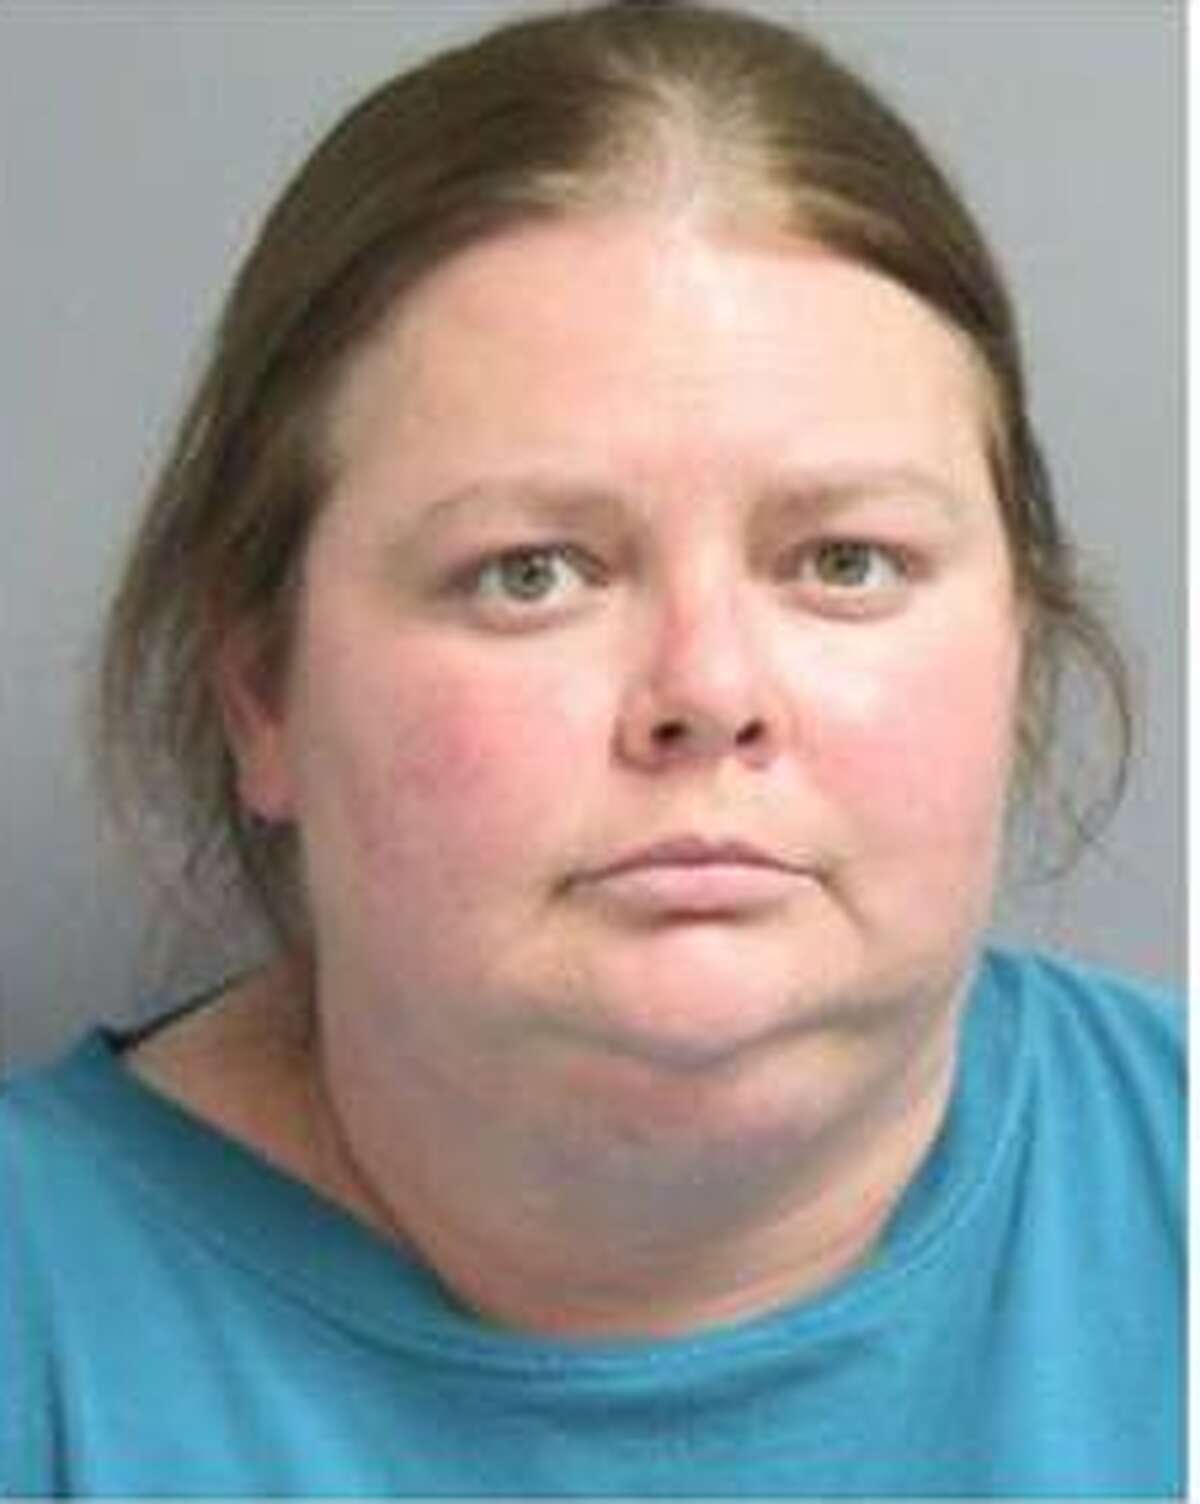 Brandie Jupe Kubish, 40, is charged with misapplication of fiduciary funds exceeding $2,500 but less than $30,000, a state jail felony.